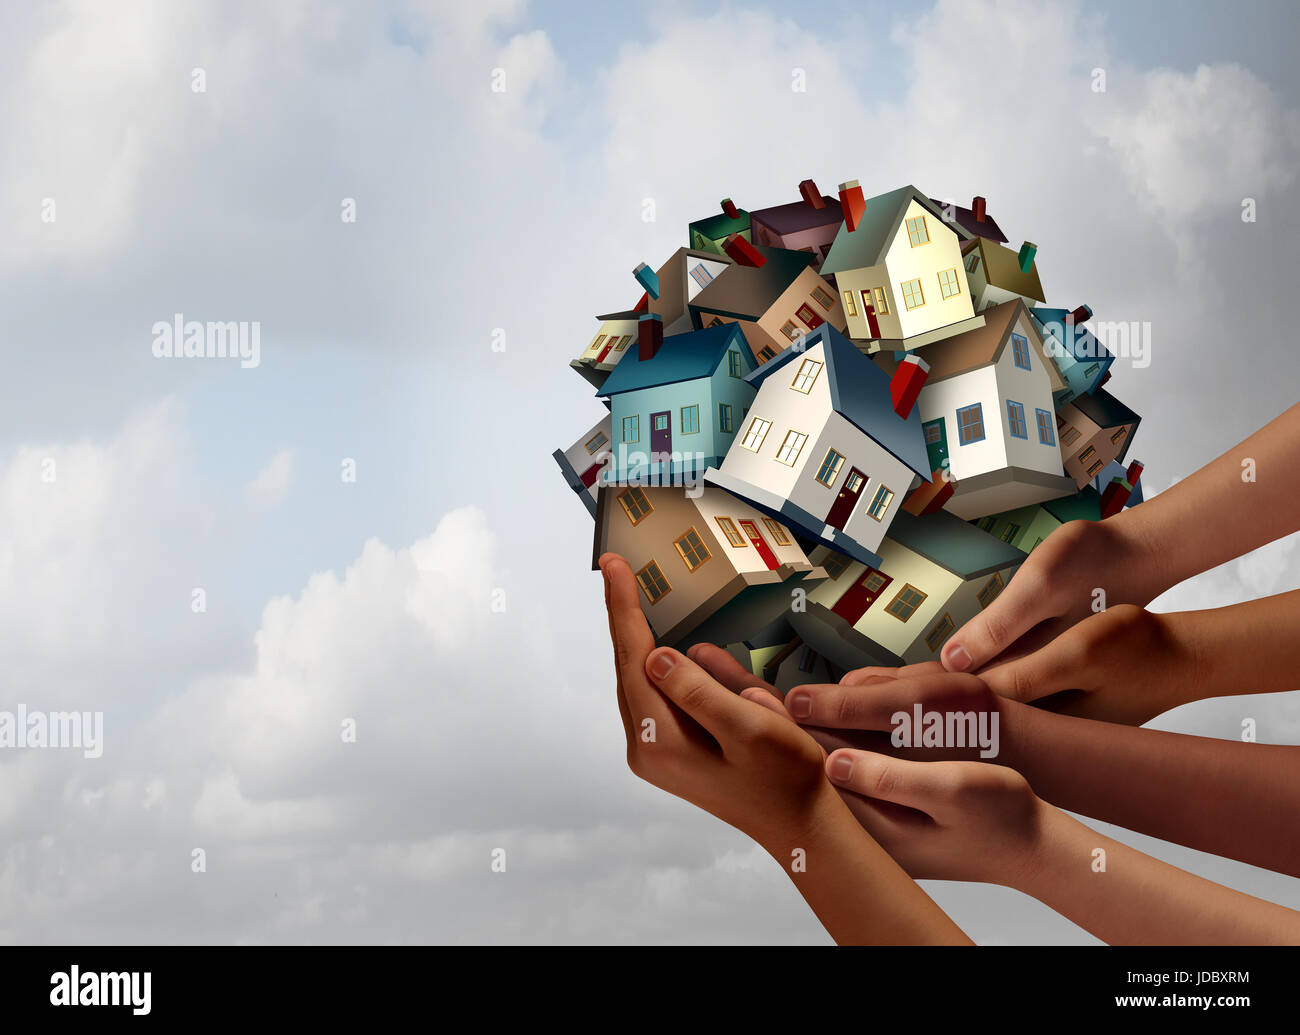 Social housing concept and supportive home ownership symbol as a group of diverse hands holding many family homes as a metaphor. Stock Photo